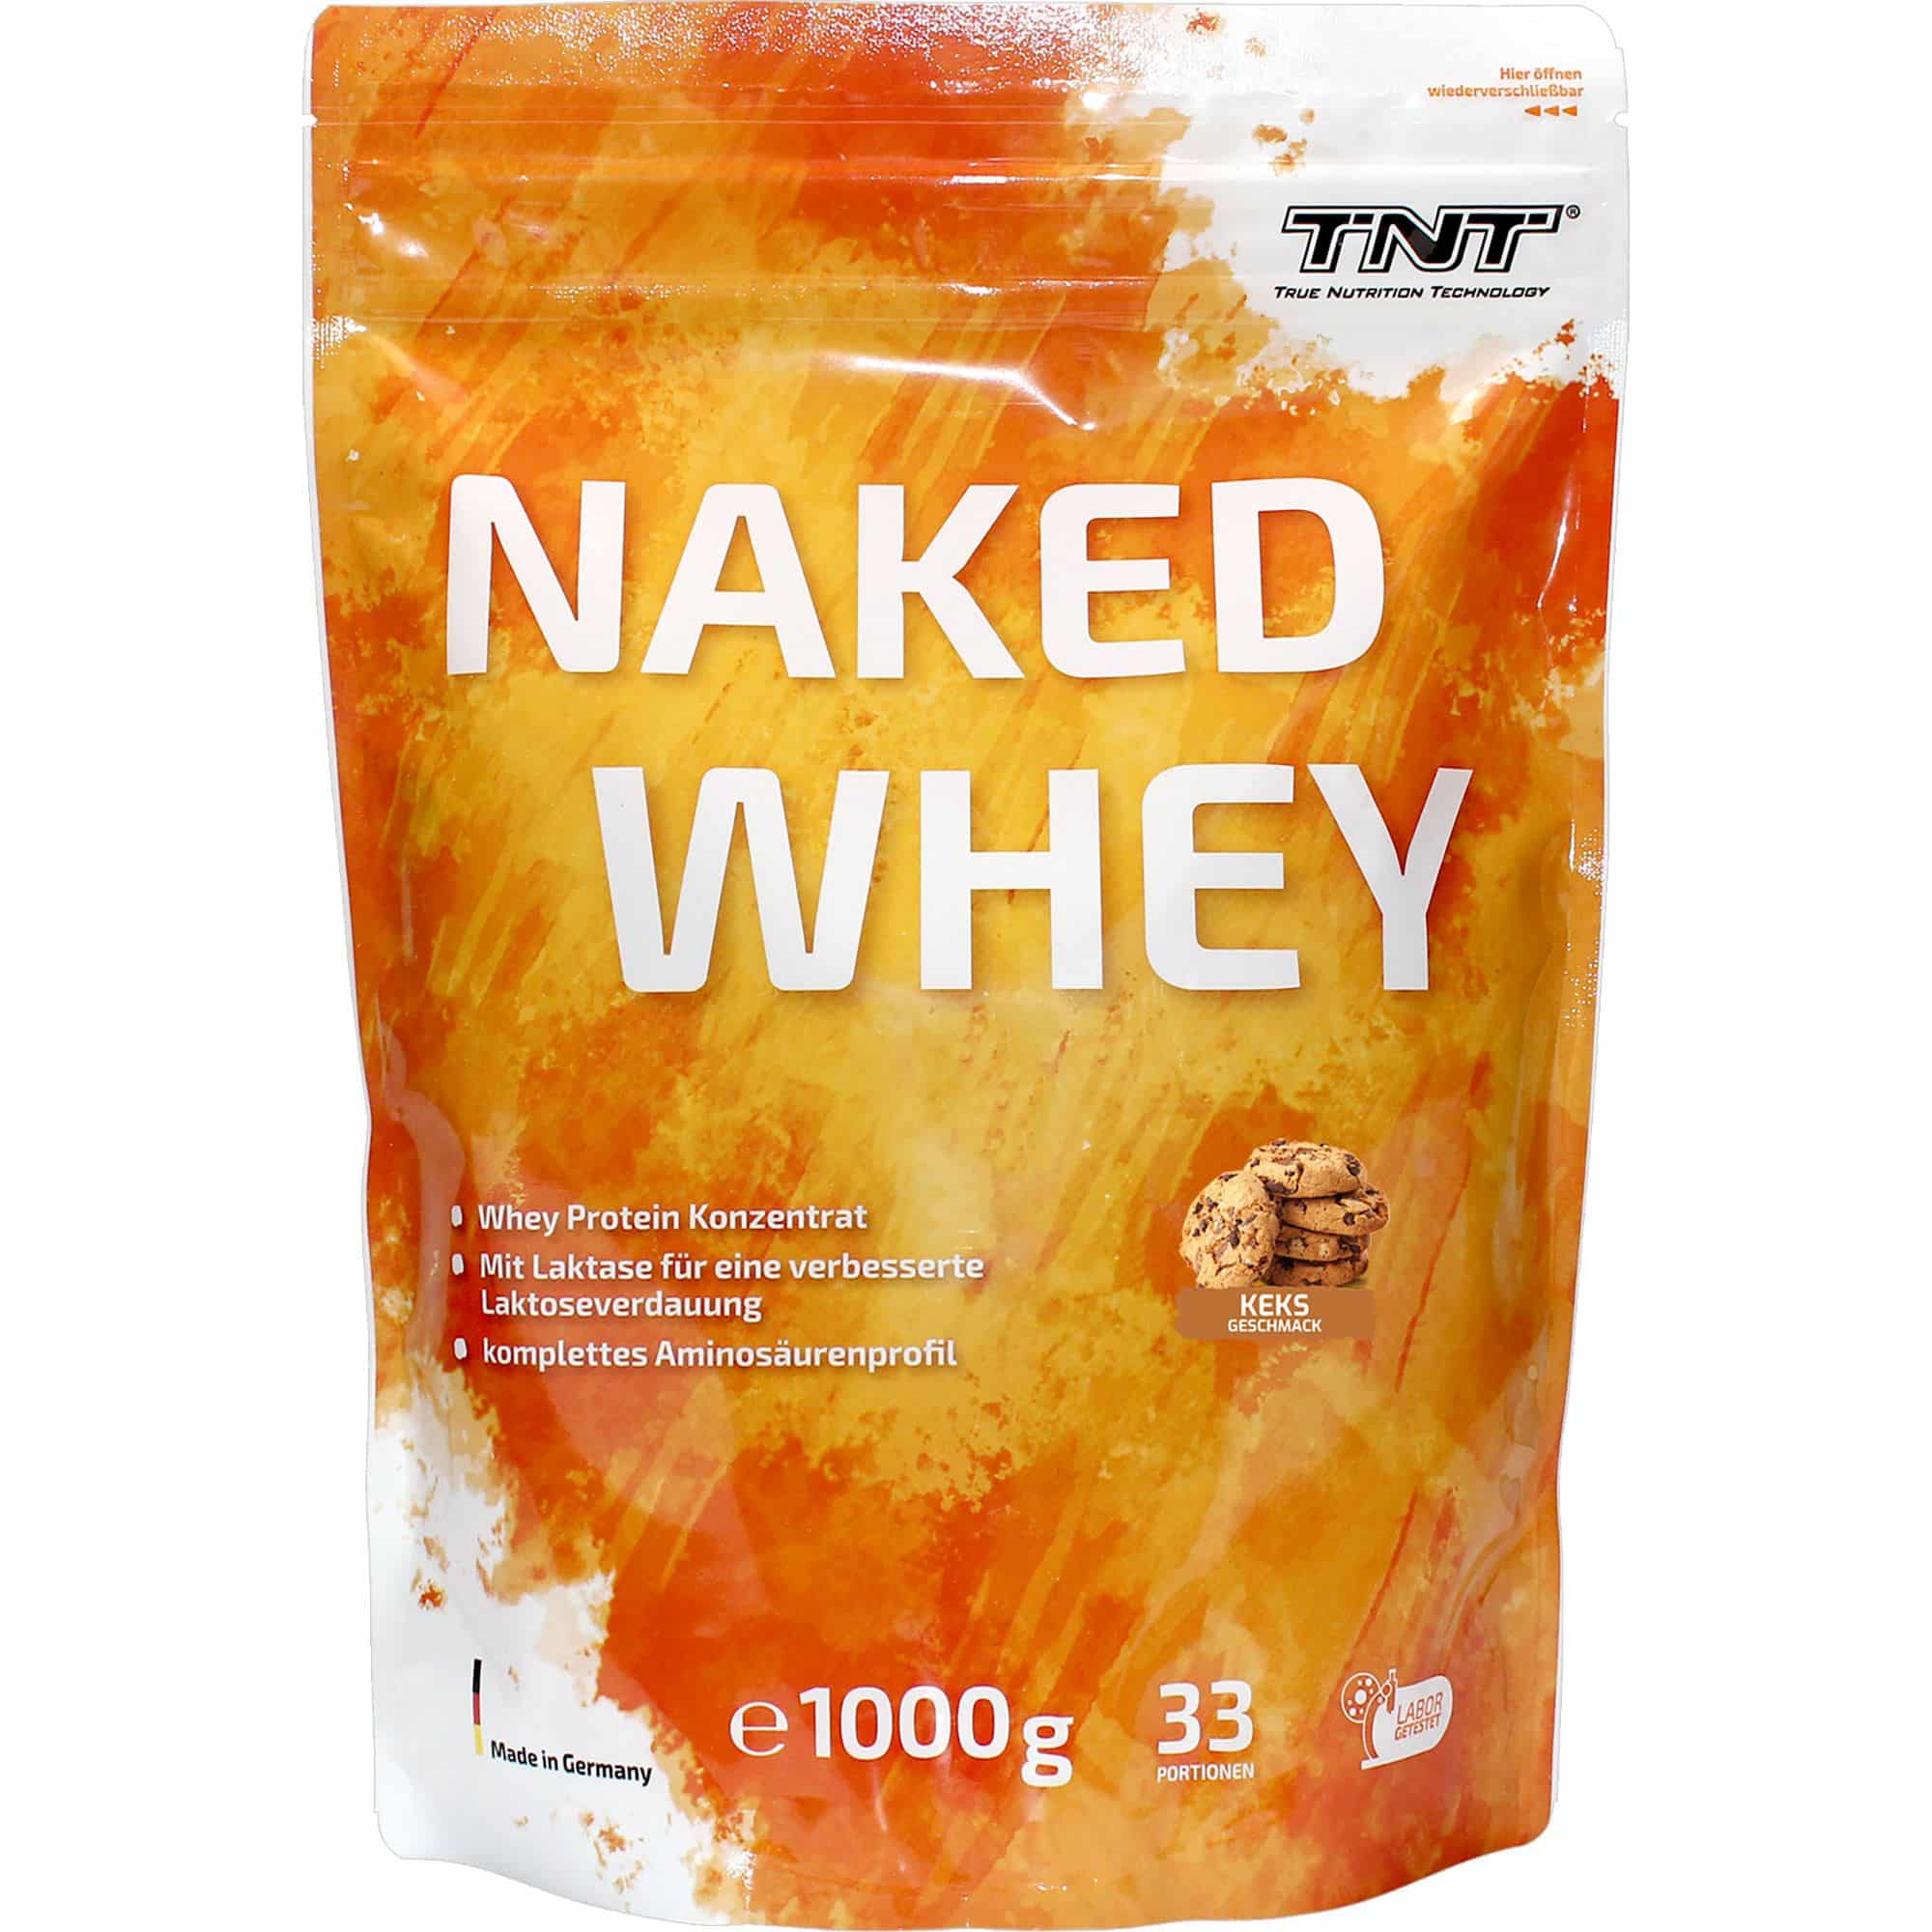 TNT Naked Whey Protein - Keks (Cookies)